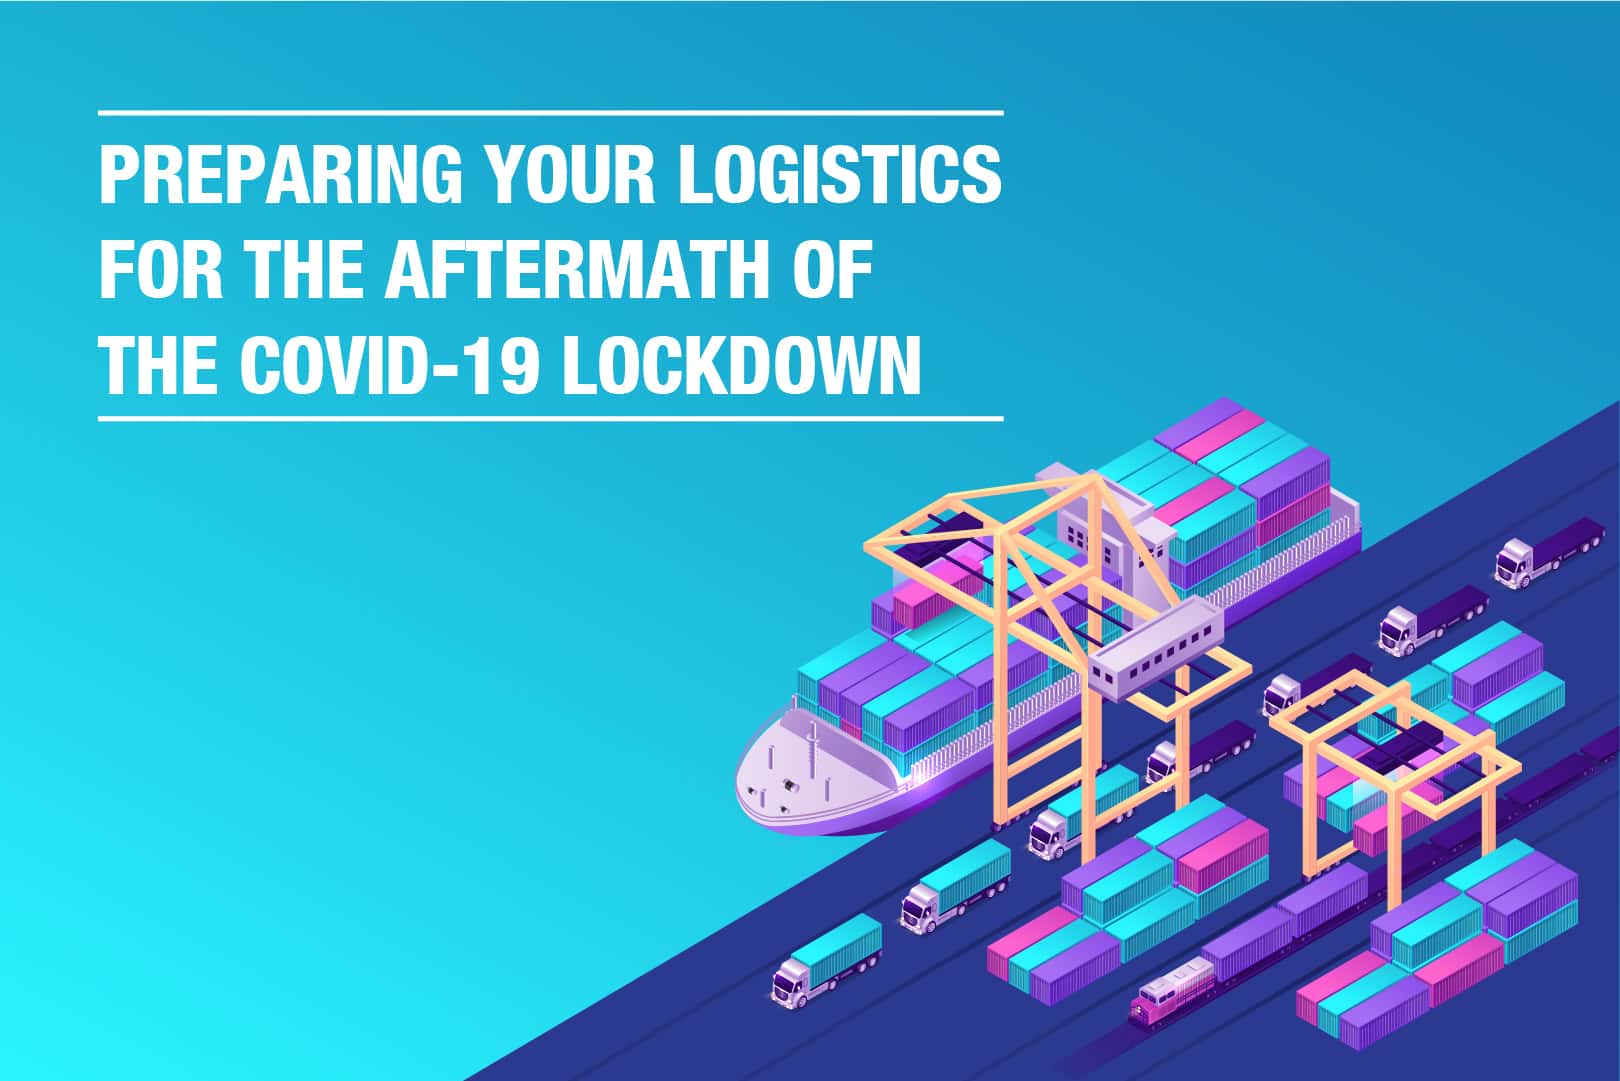 Preparing Your Logistics For The Aftermath Of The COVID-19 Lockdown